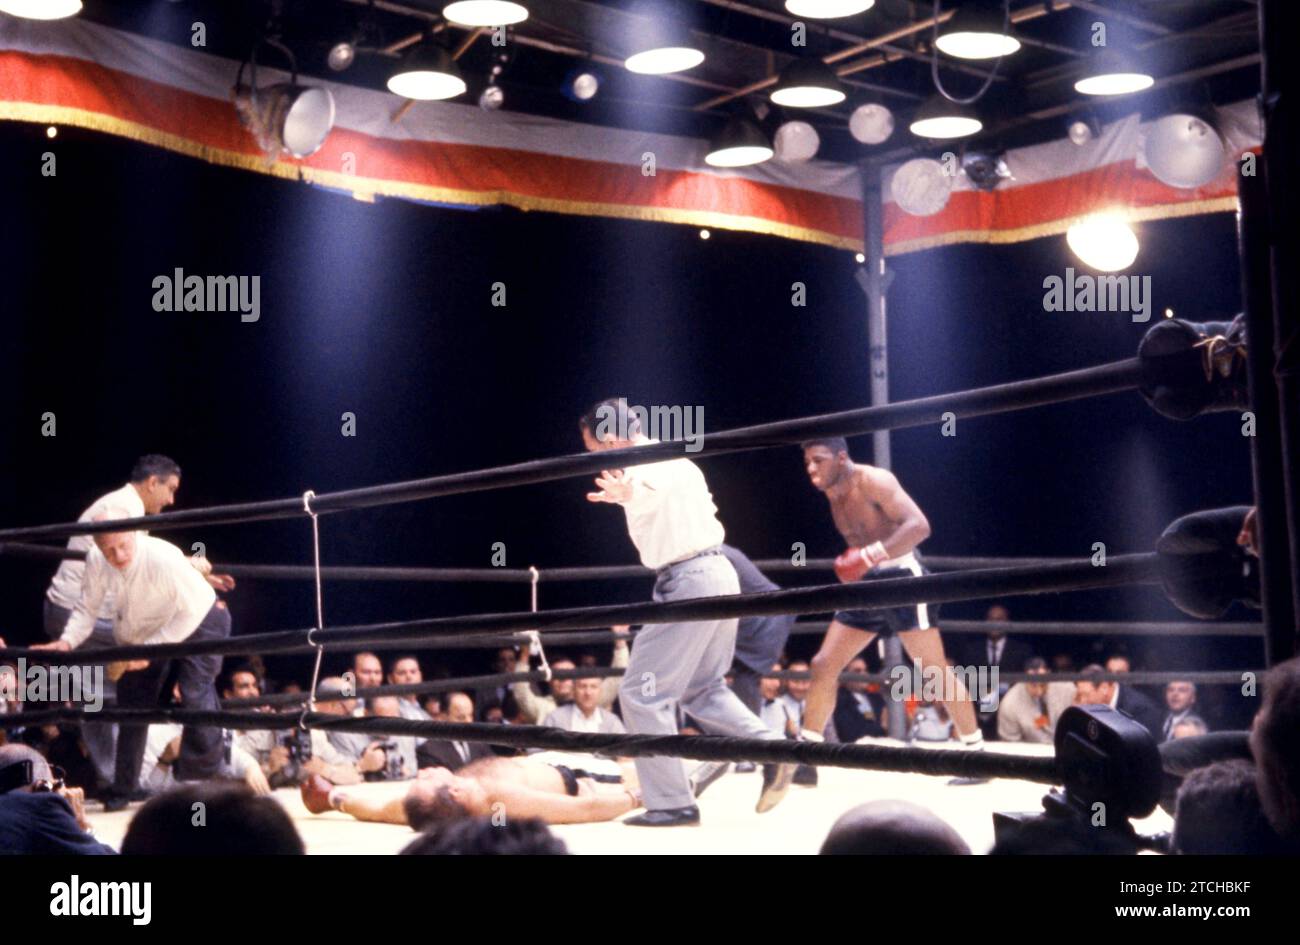 NEW YORK, NY - JUNE 20: Ingemar Johansson (1932-2009) (white trunks) of Sweden is out for the count in the 5th round during the World Heavyweight Title bout with Floyd Patterson (1935-2006) (black trunks) of the United States on June 20, 1960 at the Polo Grounds in New York, New York.  The referee is Arthur Mercante. (Photo by Hy Peskin) *** Local Caption *** Ingemar Johansson;Floyd Patterson;Arthur Mercante Stock Photo